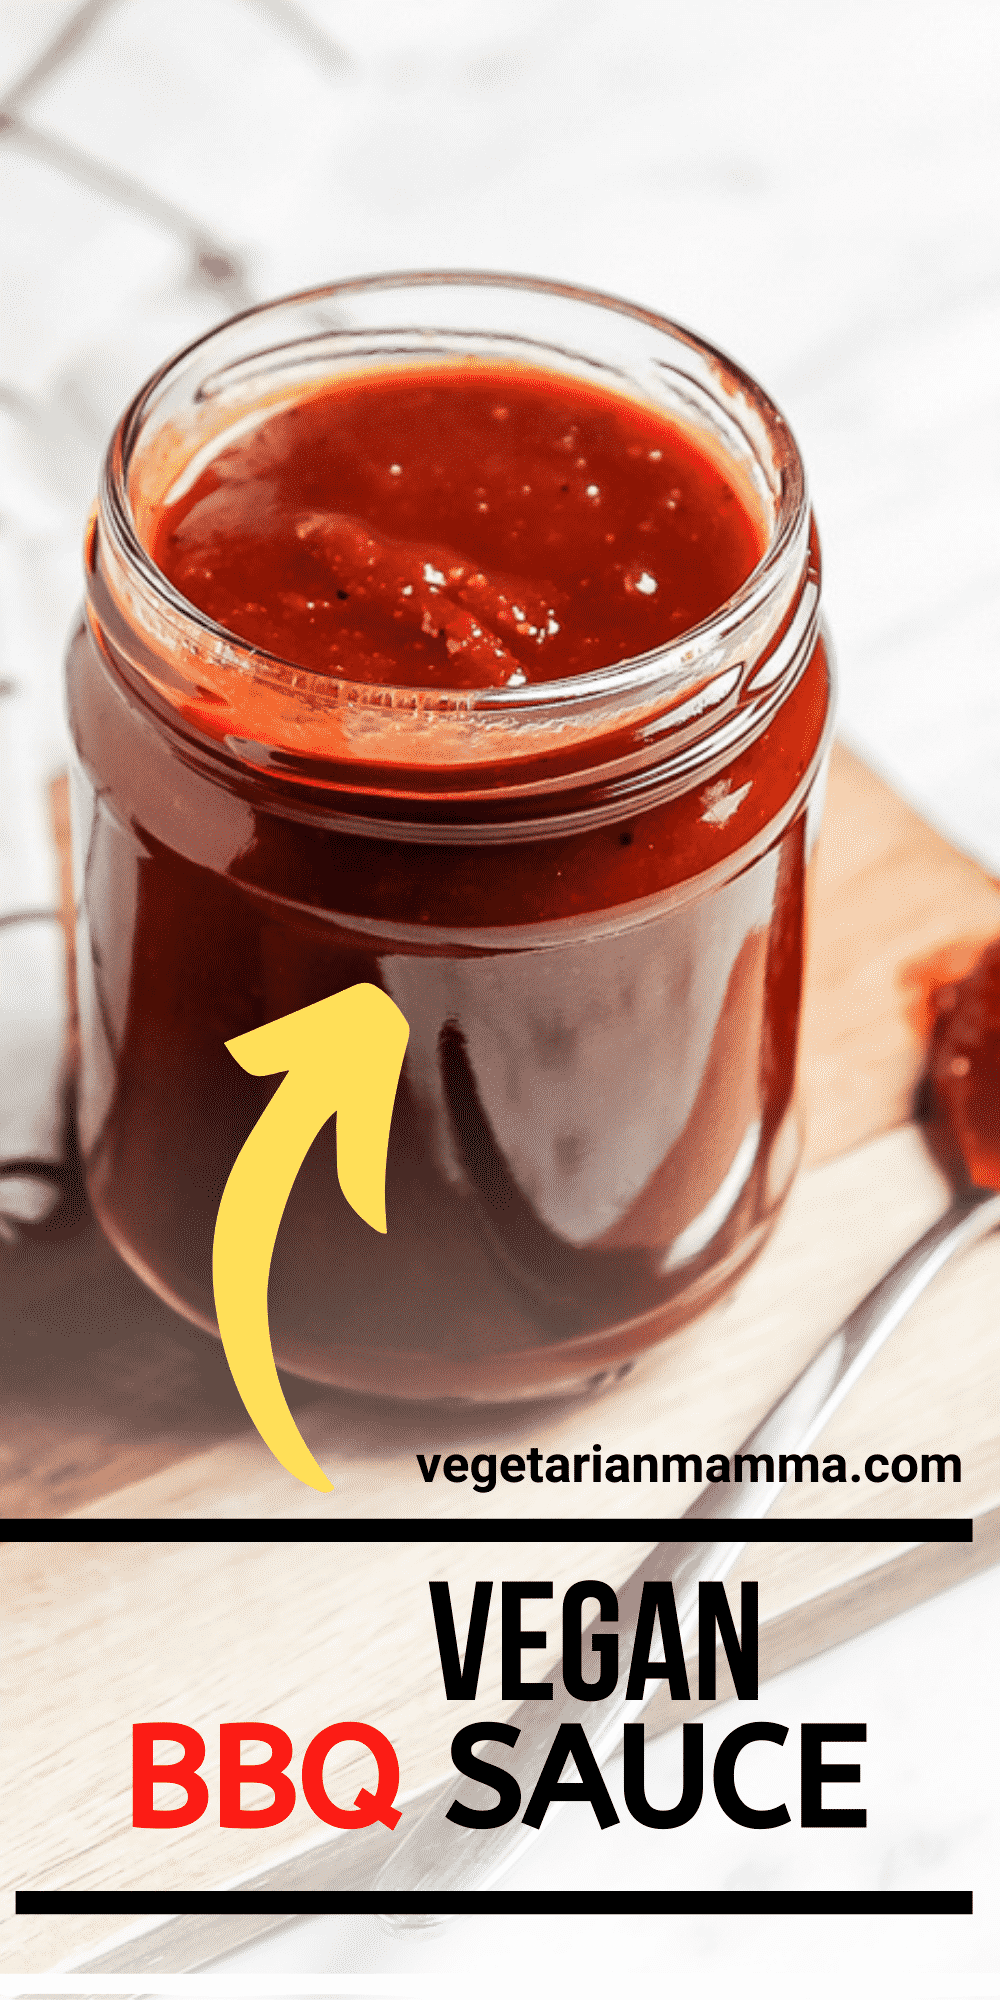 Make your own Vegan BBQ Sauce at home! It's perfectly tangy with a hint of smokiness for the best barbecue sauce you'll ever make. #vegansauce #glutenfreebbqsauce